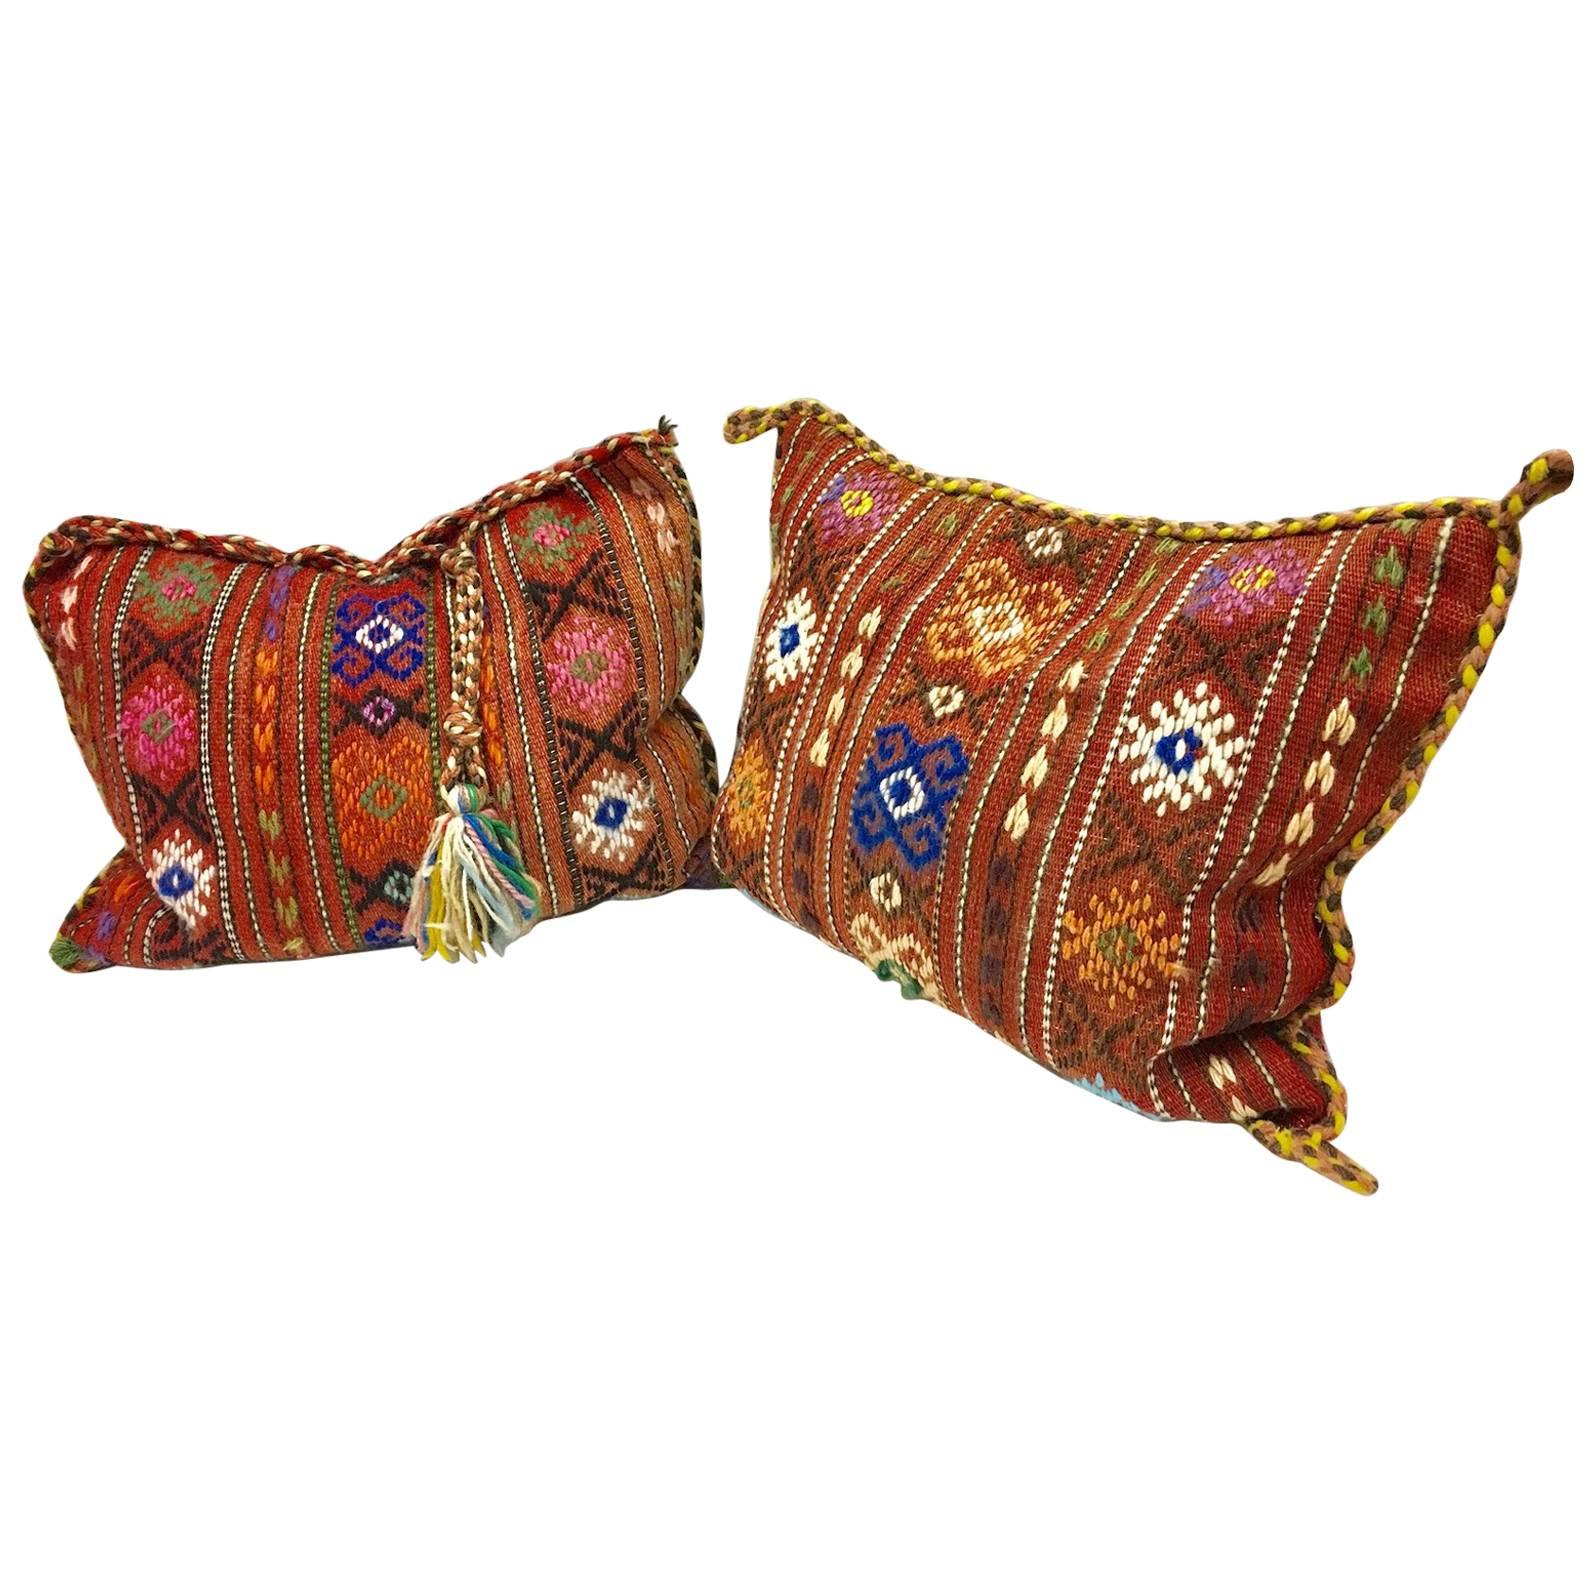 Pair of Gypsy Turkish Oriental Salt Bag or Rug Embroidery Pillows